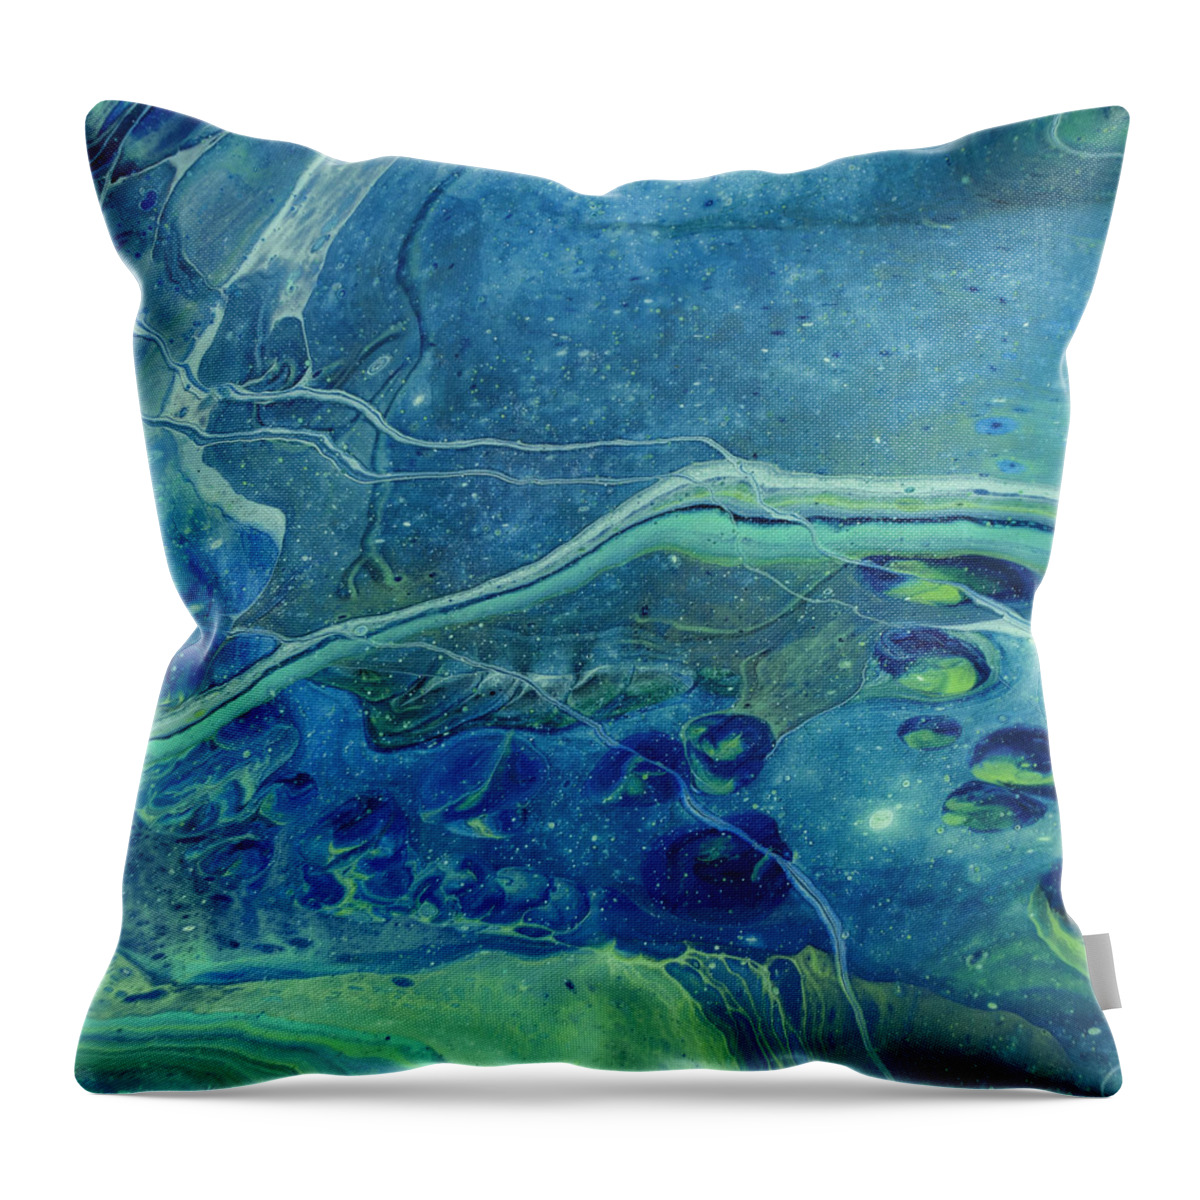 Abstract Throw Pillow featuring the painting In Depths Unknown by Joanne Grant